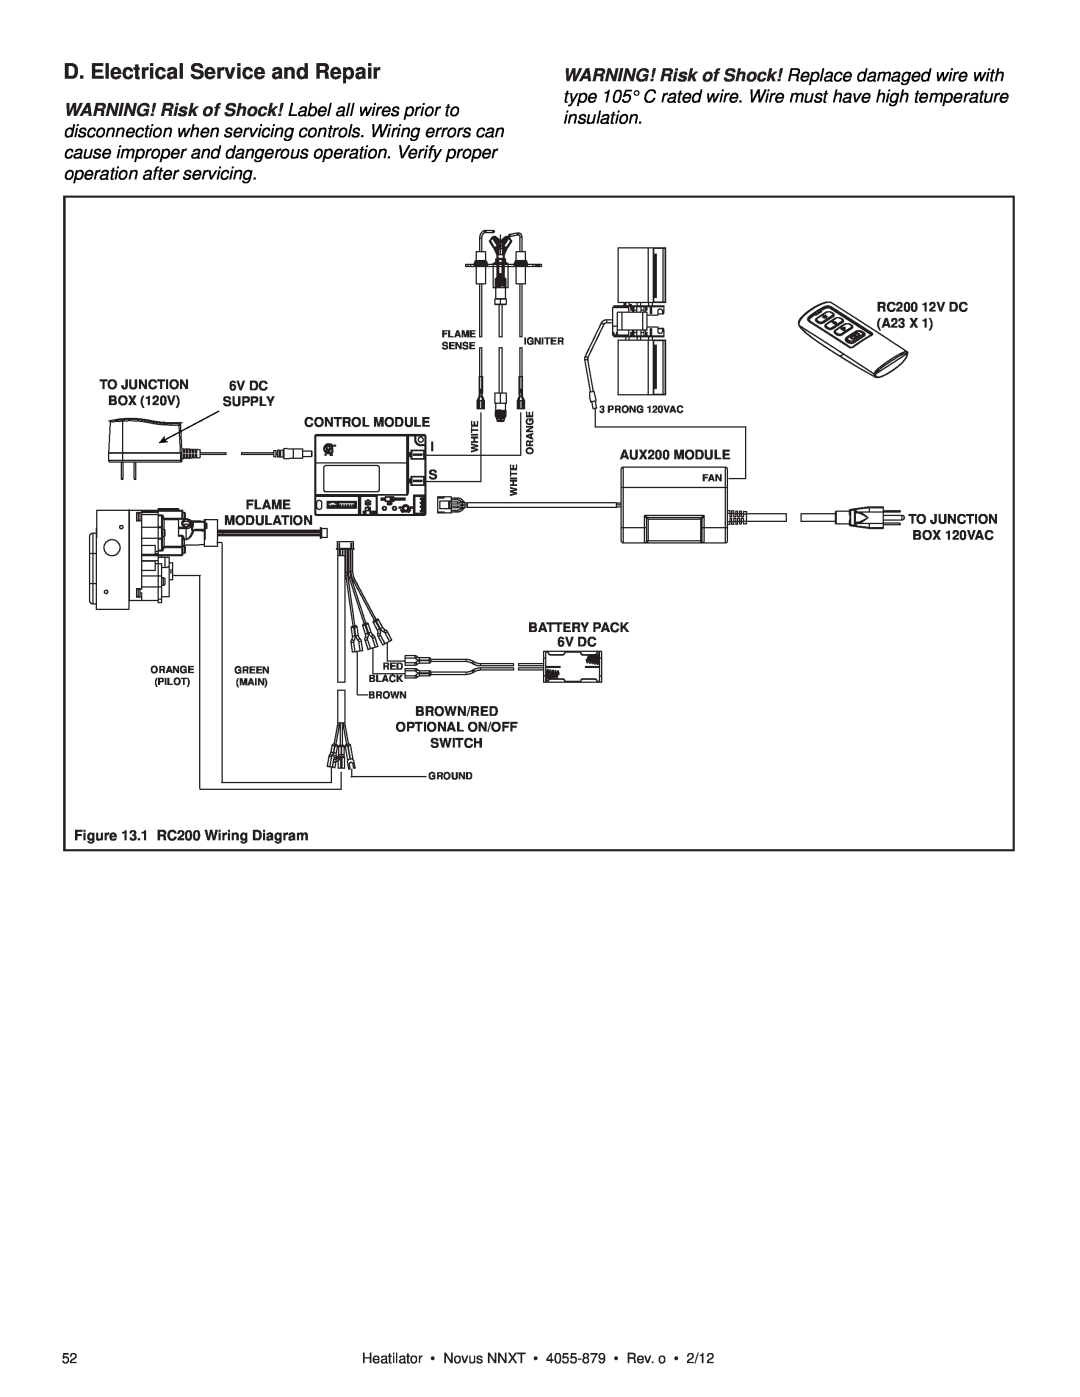 Heatiator NNXT4236IL NNXT3933I, NNXT3933IL owner manual D. Electrical Service and Repair, 1 RC200 Wiring Diagram 